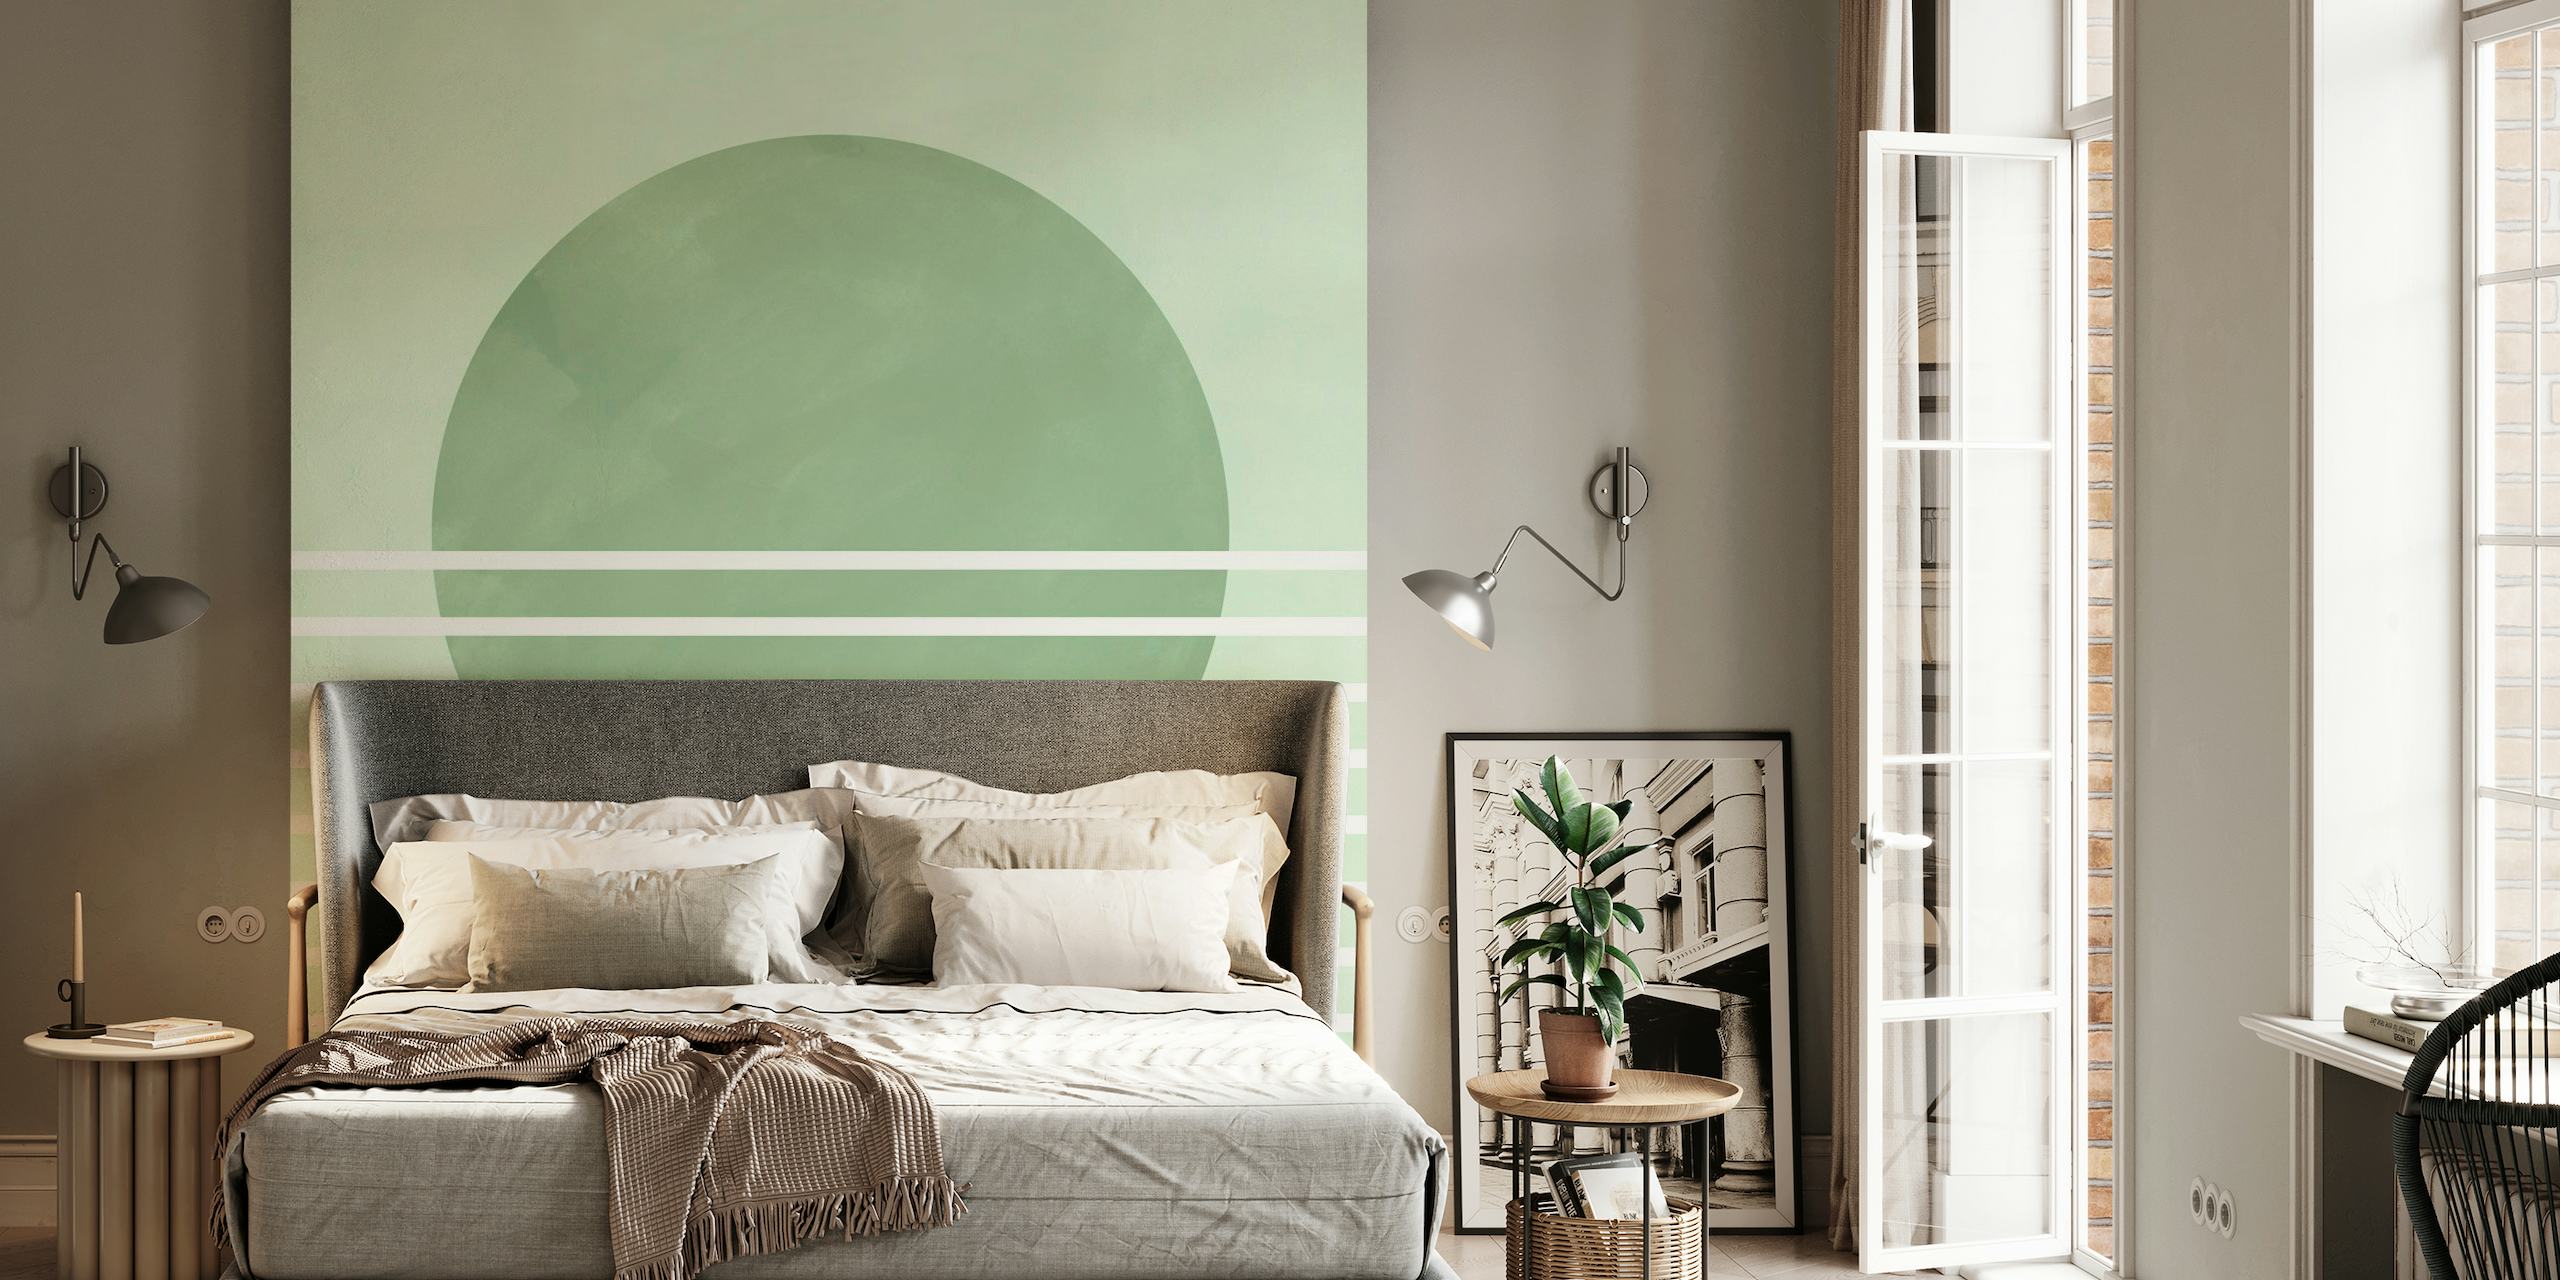 Abstract wall mural with soft green circle and horizontal stripes